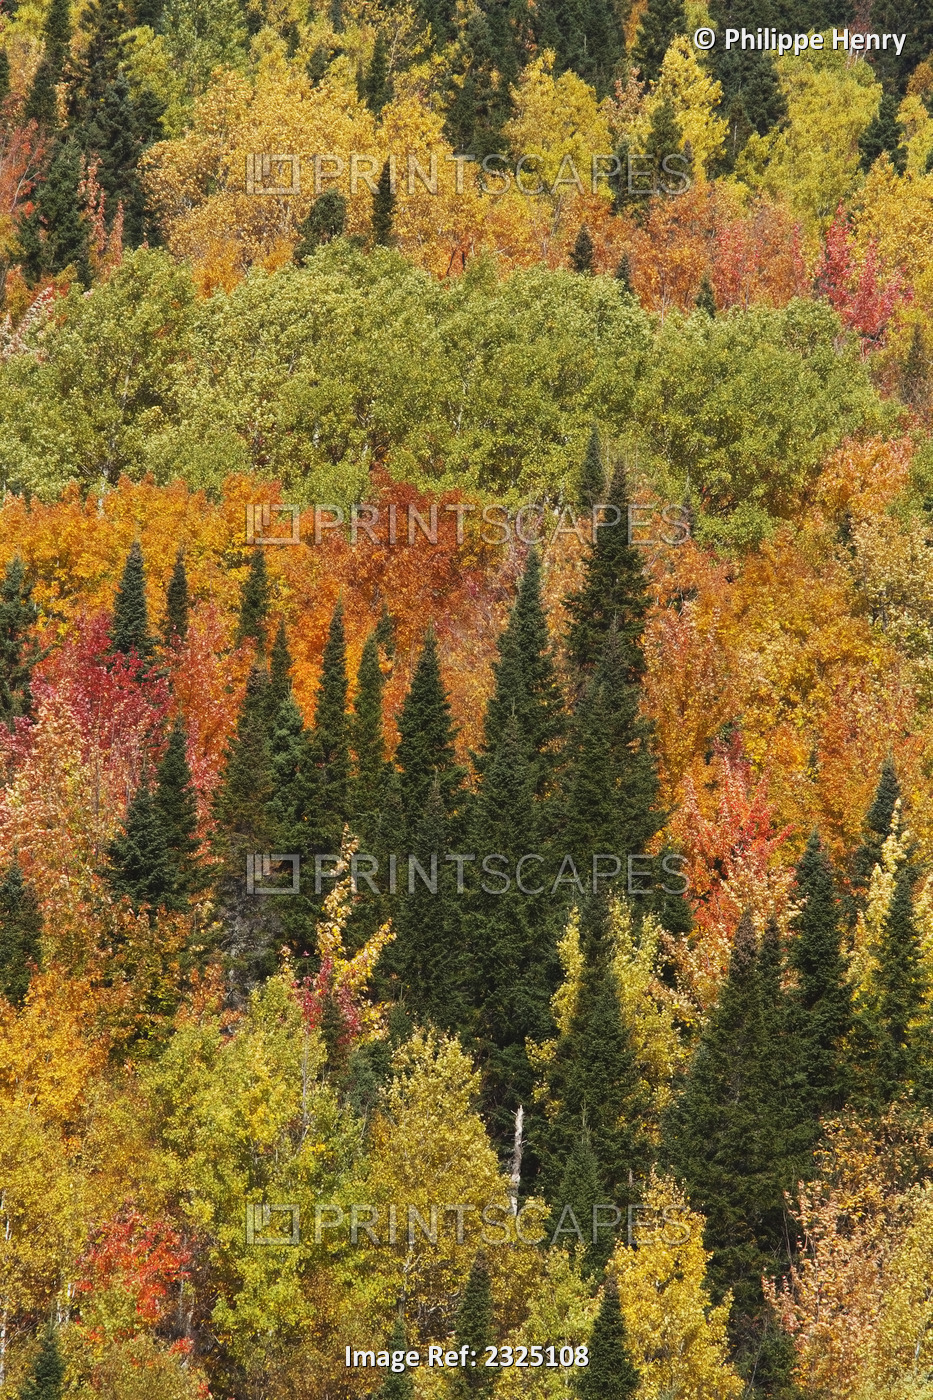 Boreal Forest In Fall Colors In Gaspesie National Park; Quebec Canada